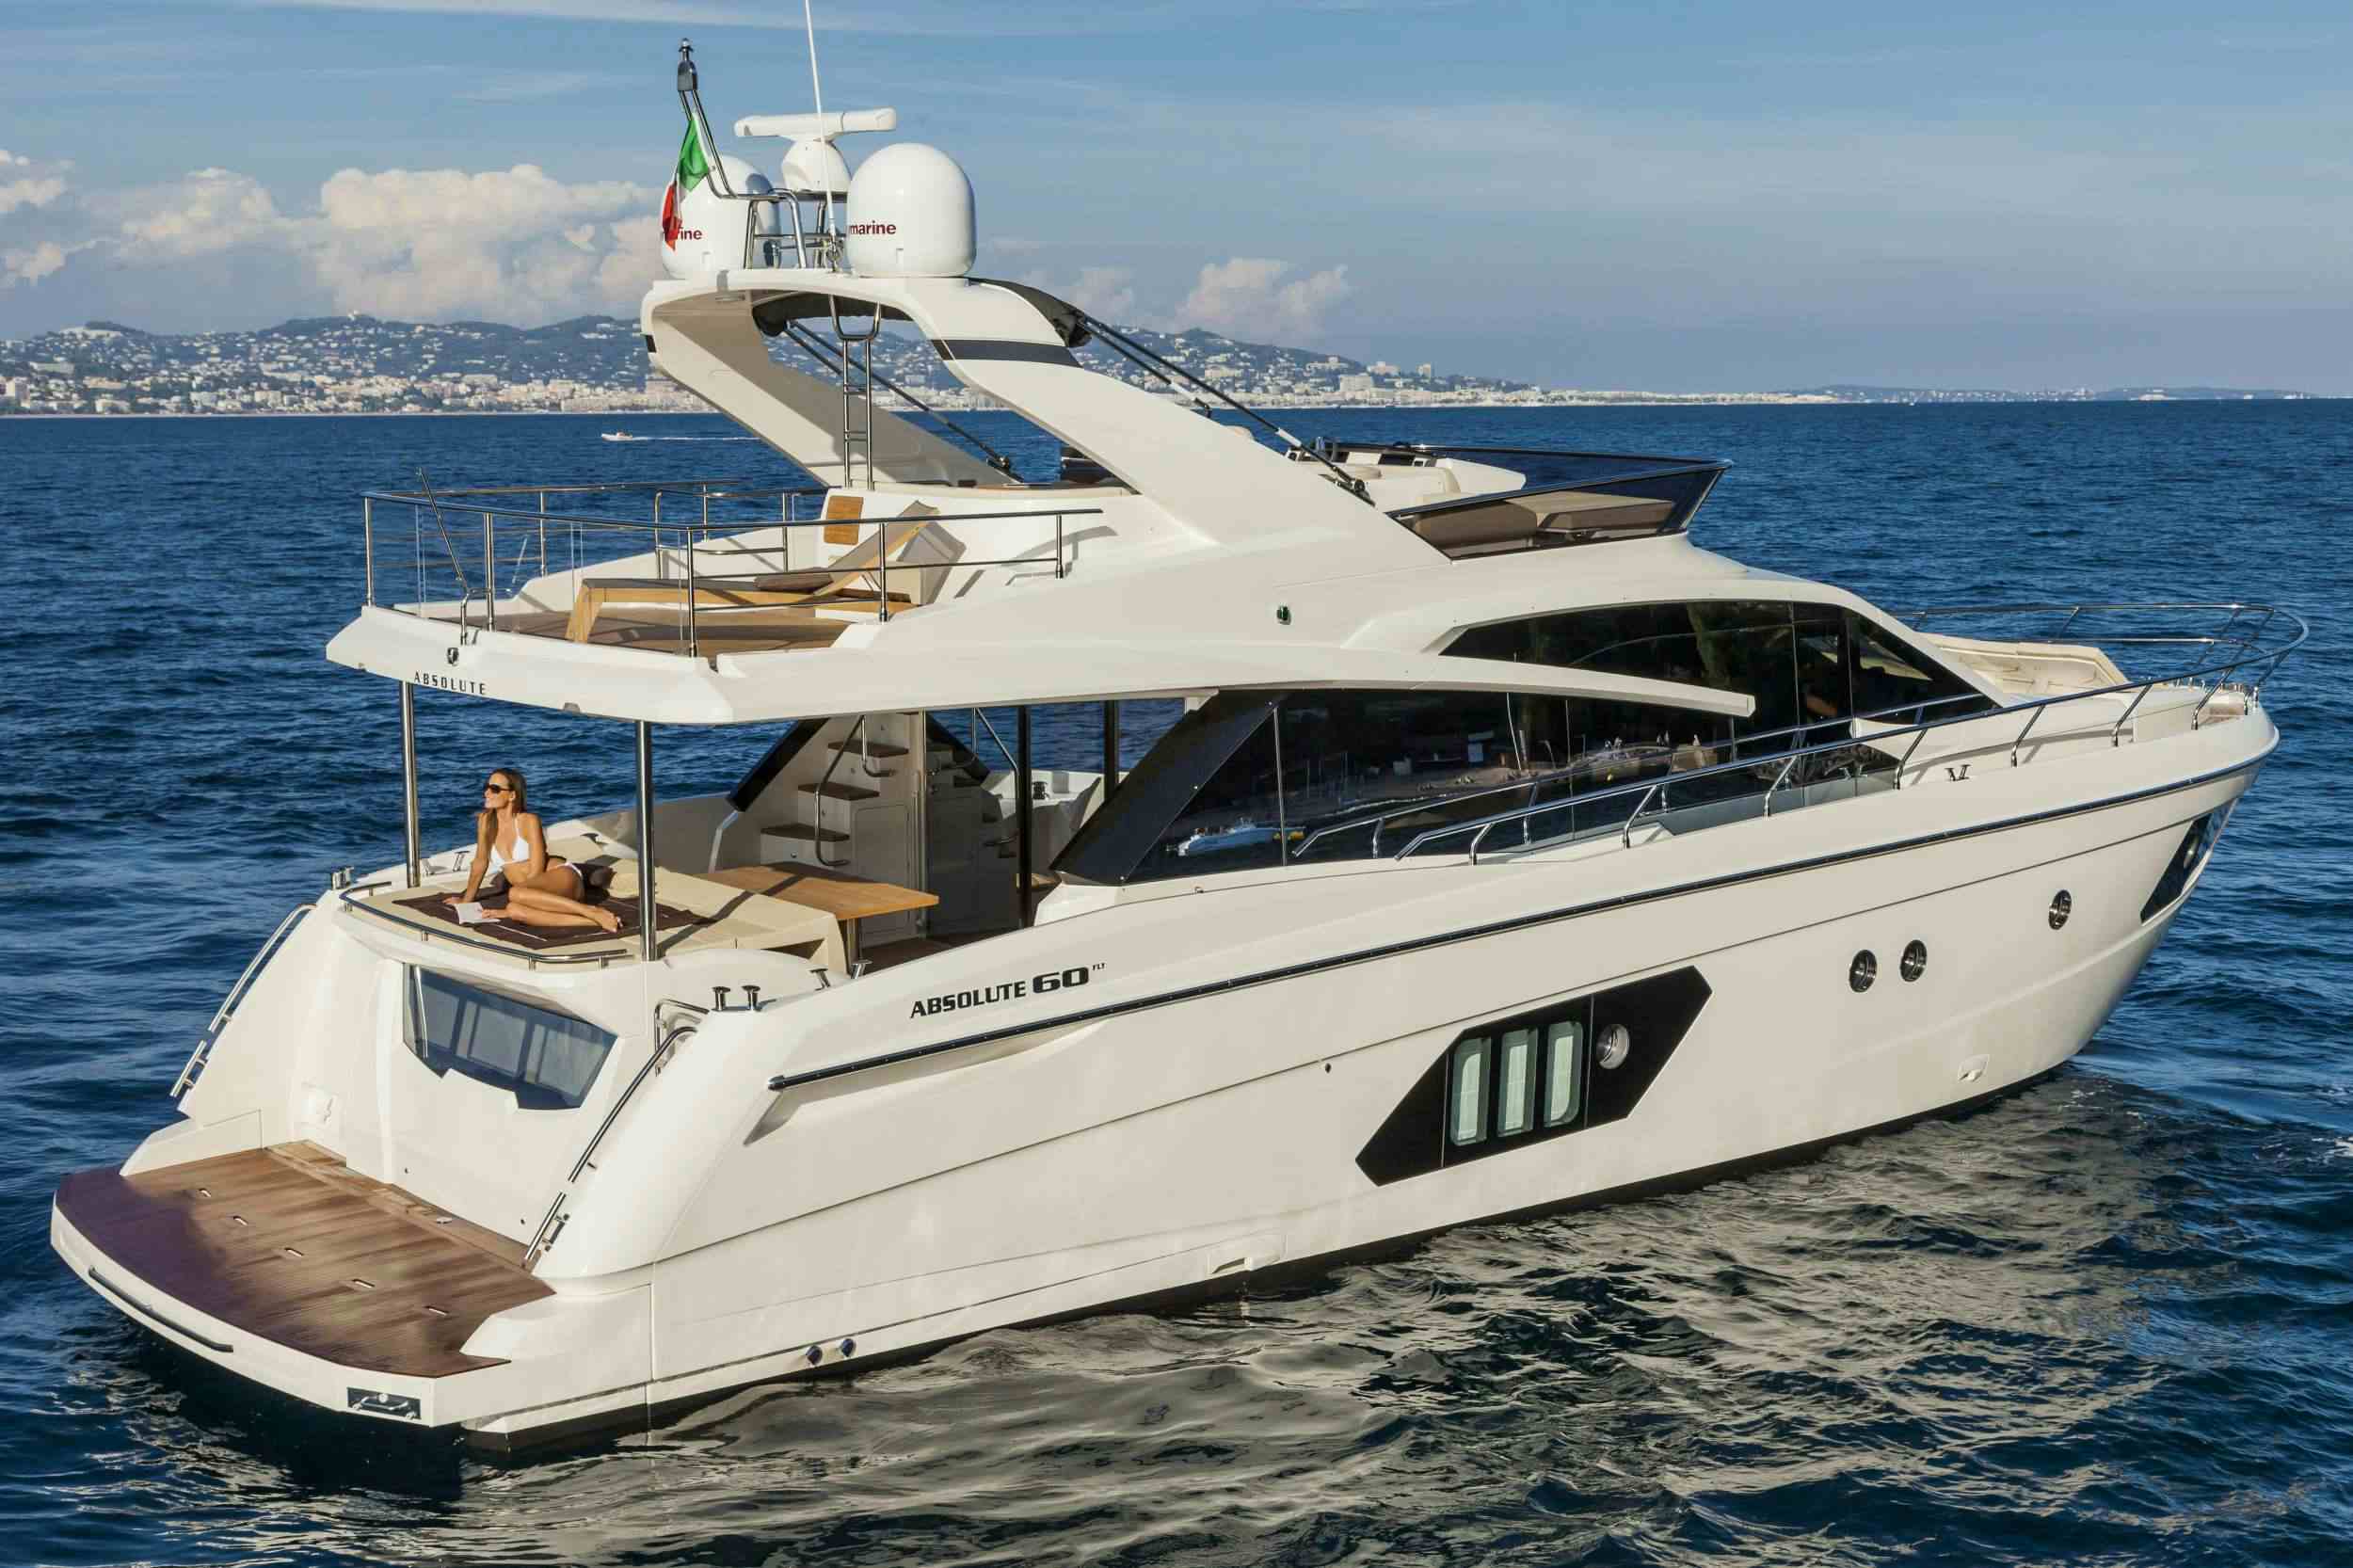 ABSOLUTE - Yacht Charter Olbia & Boat hire in Fr. Riviera, Corsica & Sardinia 1